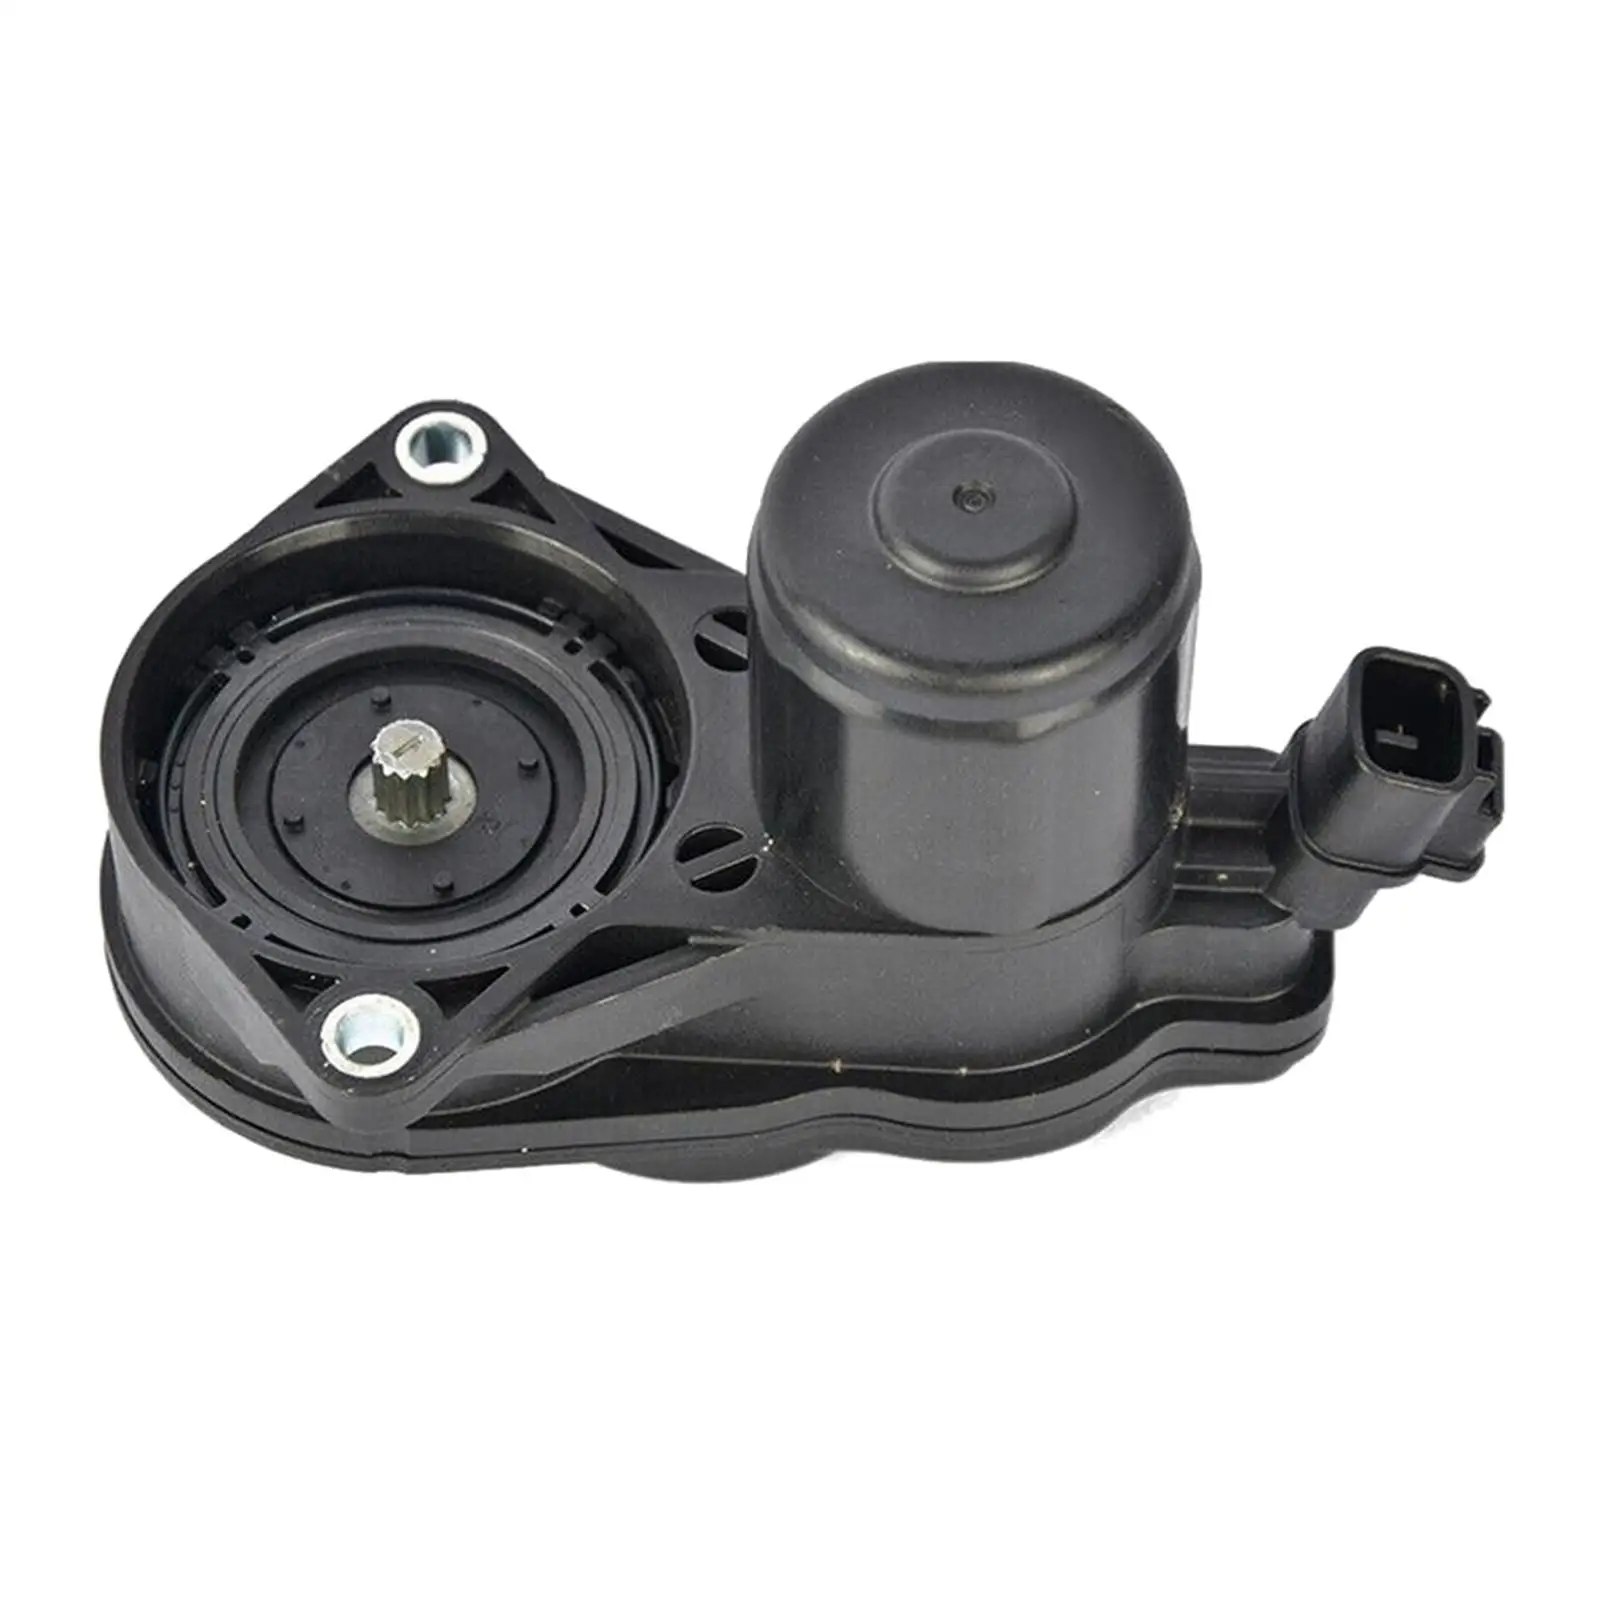 Parking Brake Actuator Assembly Automotive Replacement Part for Toyota Corolla Hatchback Avalon for sienna Long Service Life